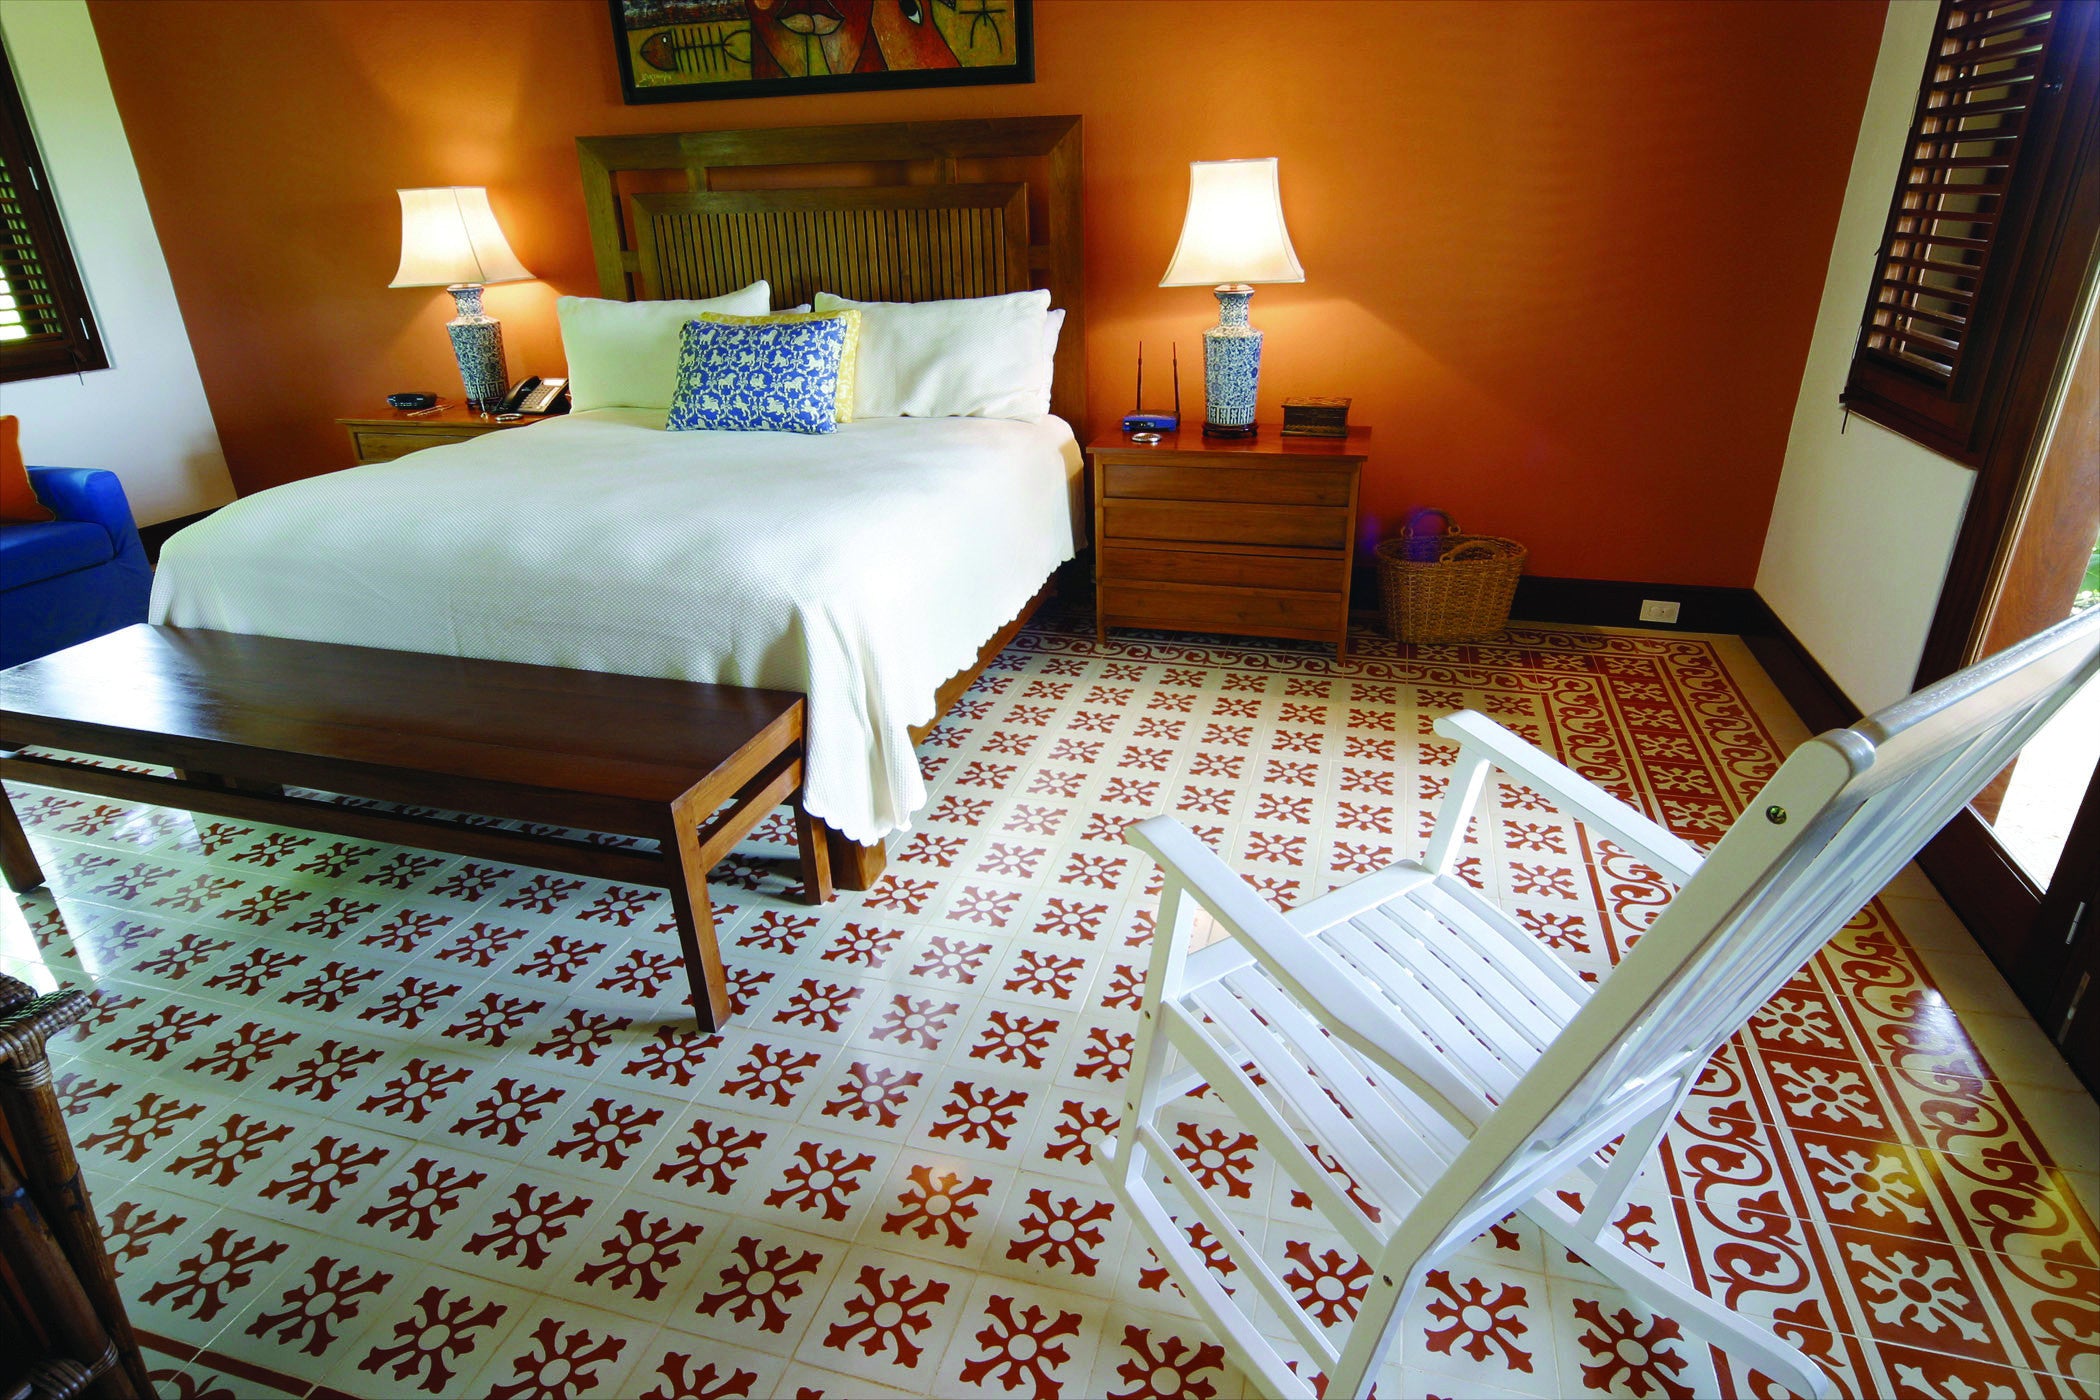 Encaustic cement tile flooring can be customized and is very durable